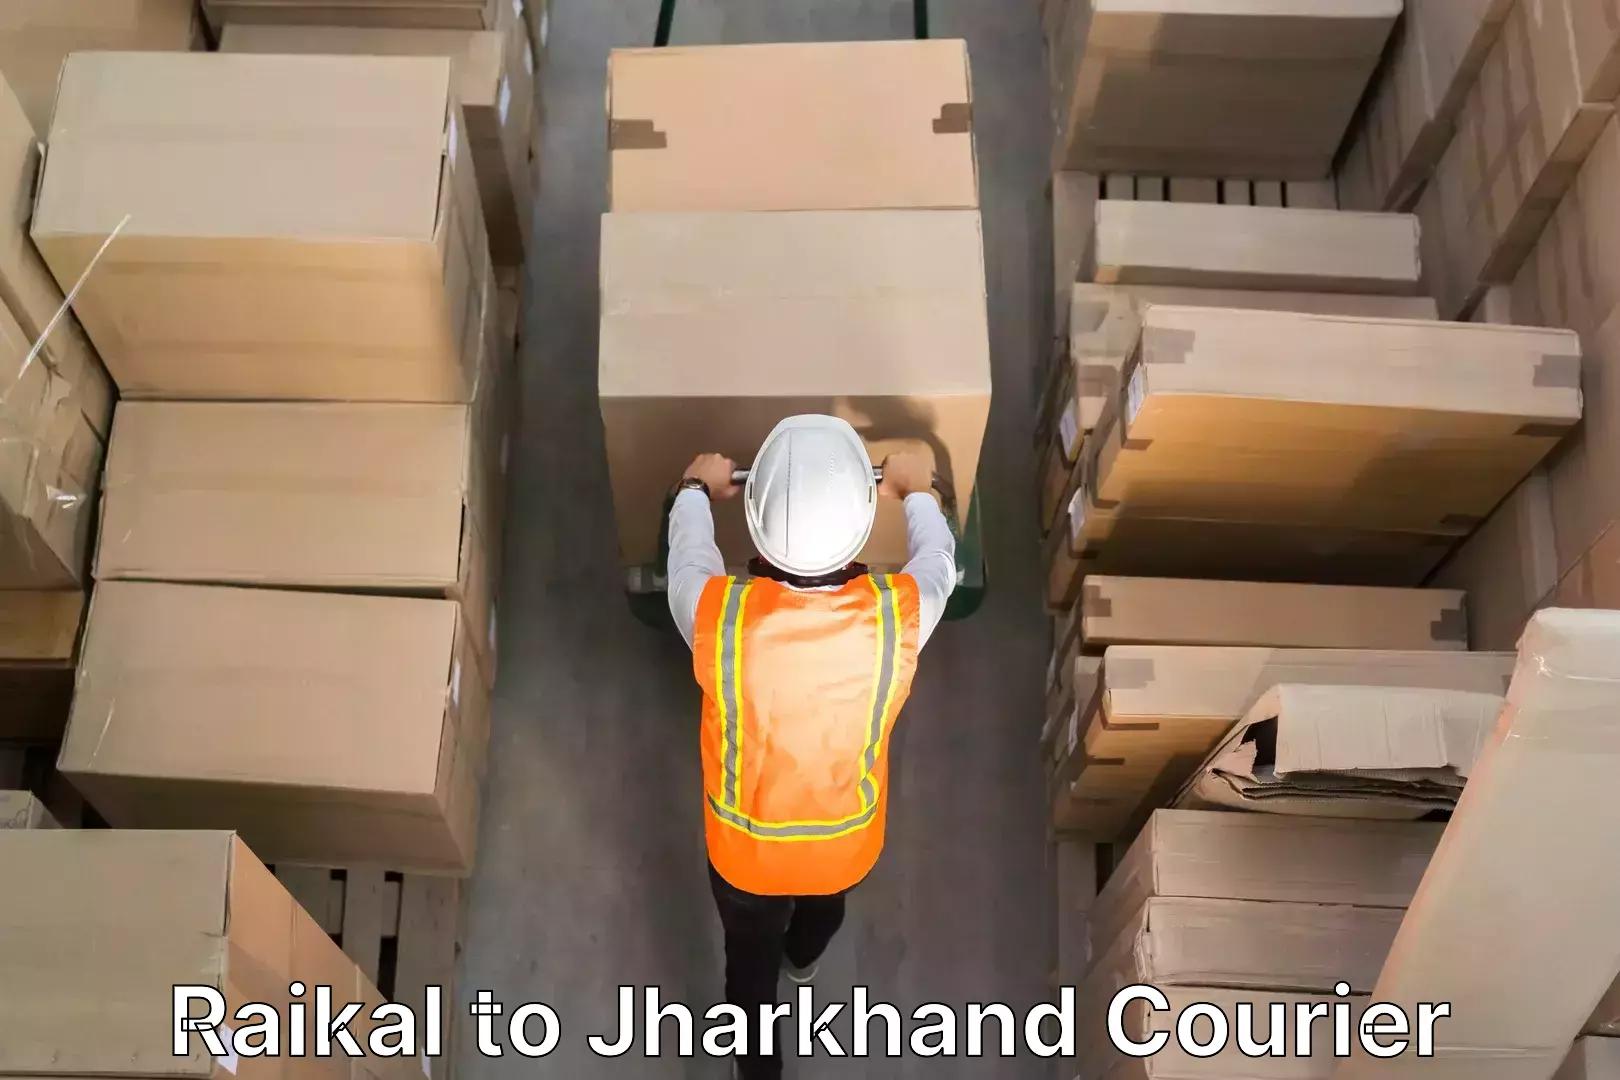 Budget-friendly movers in Raikal to Jharkhand